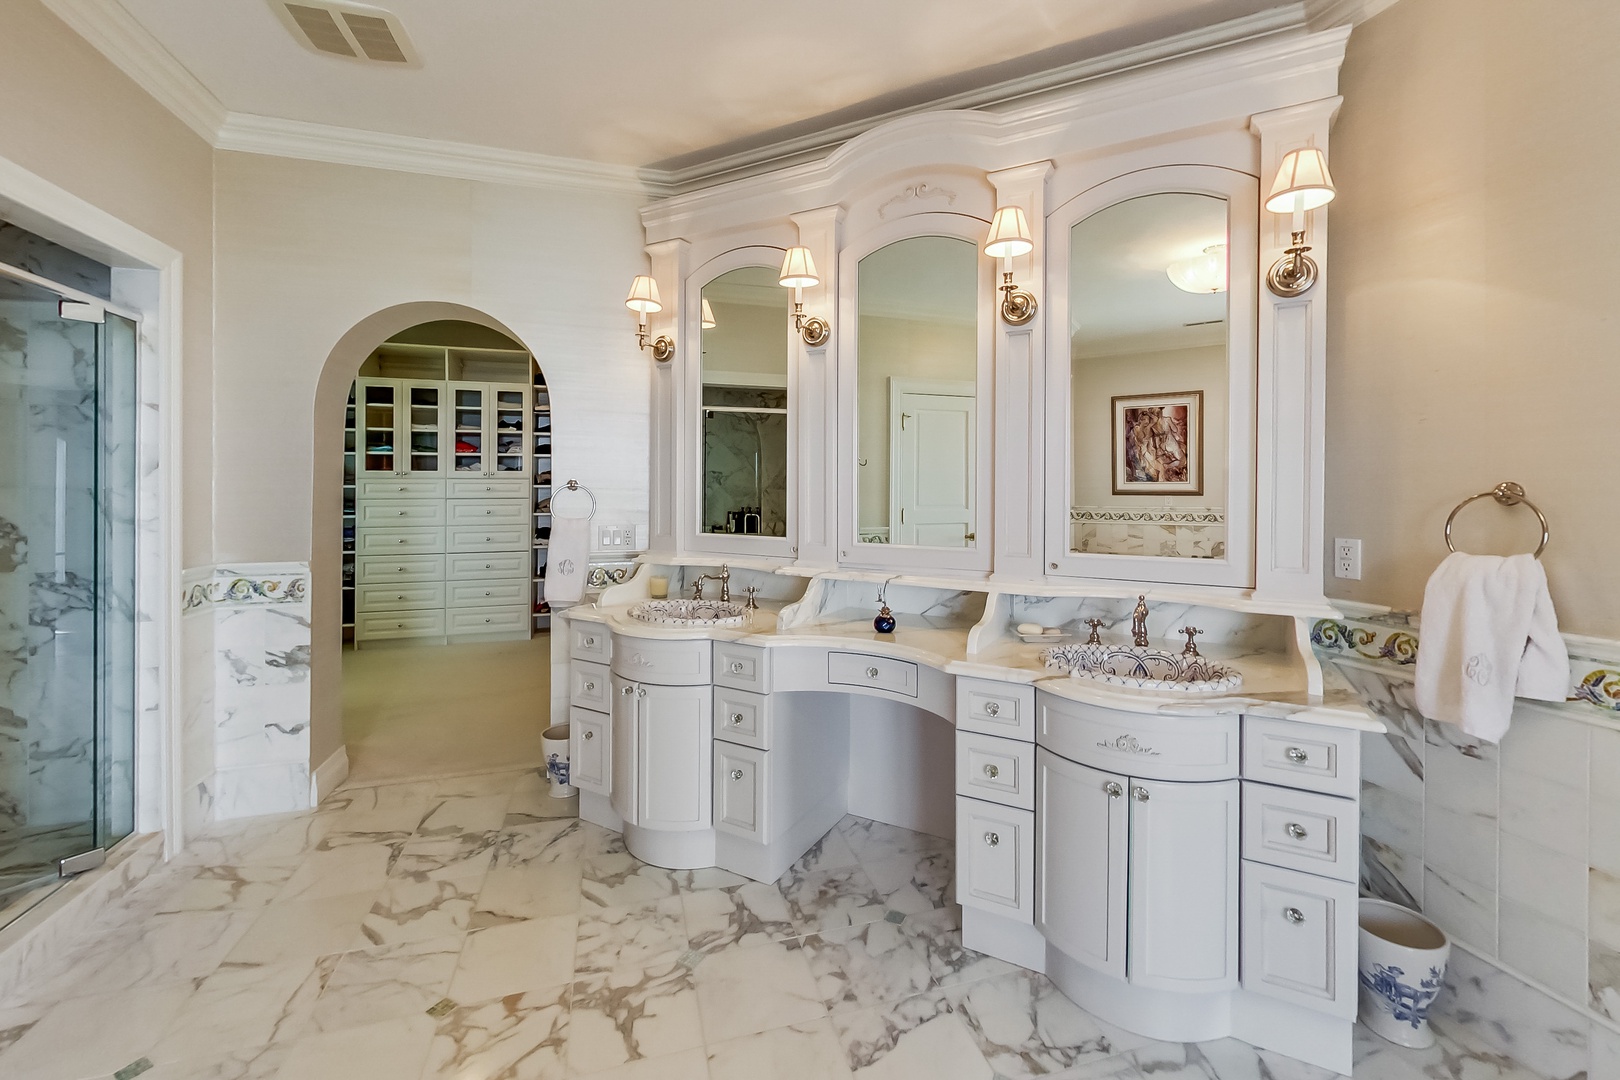 His-and-Hers vanities take on a whole new meaning, plus that huge dressing room!